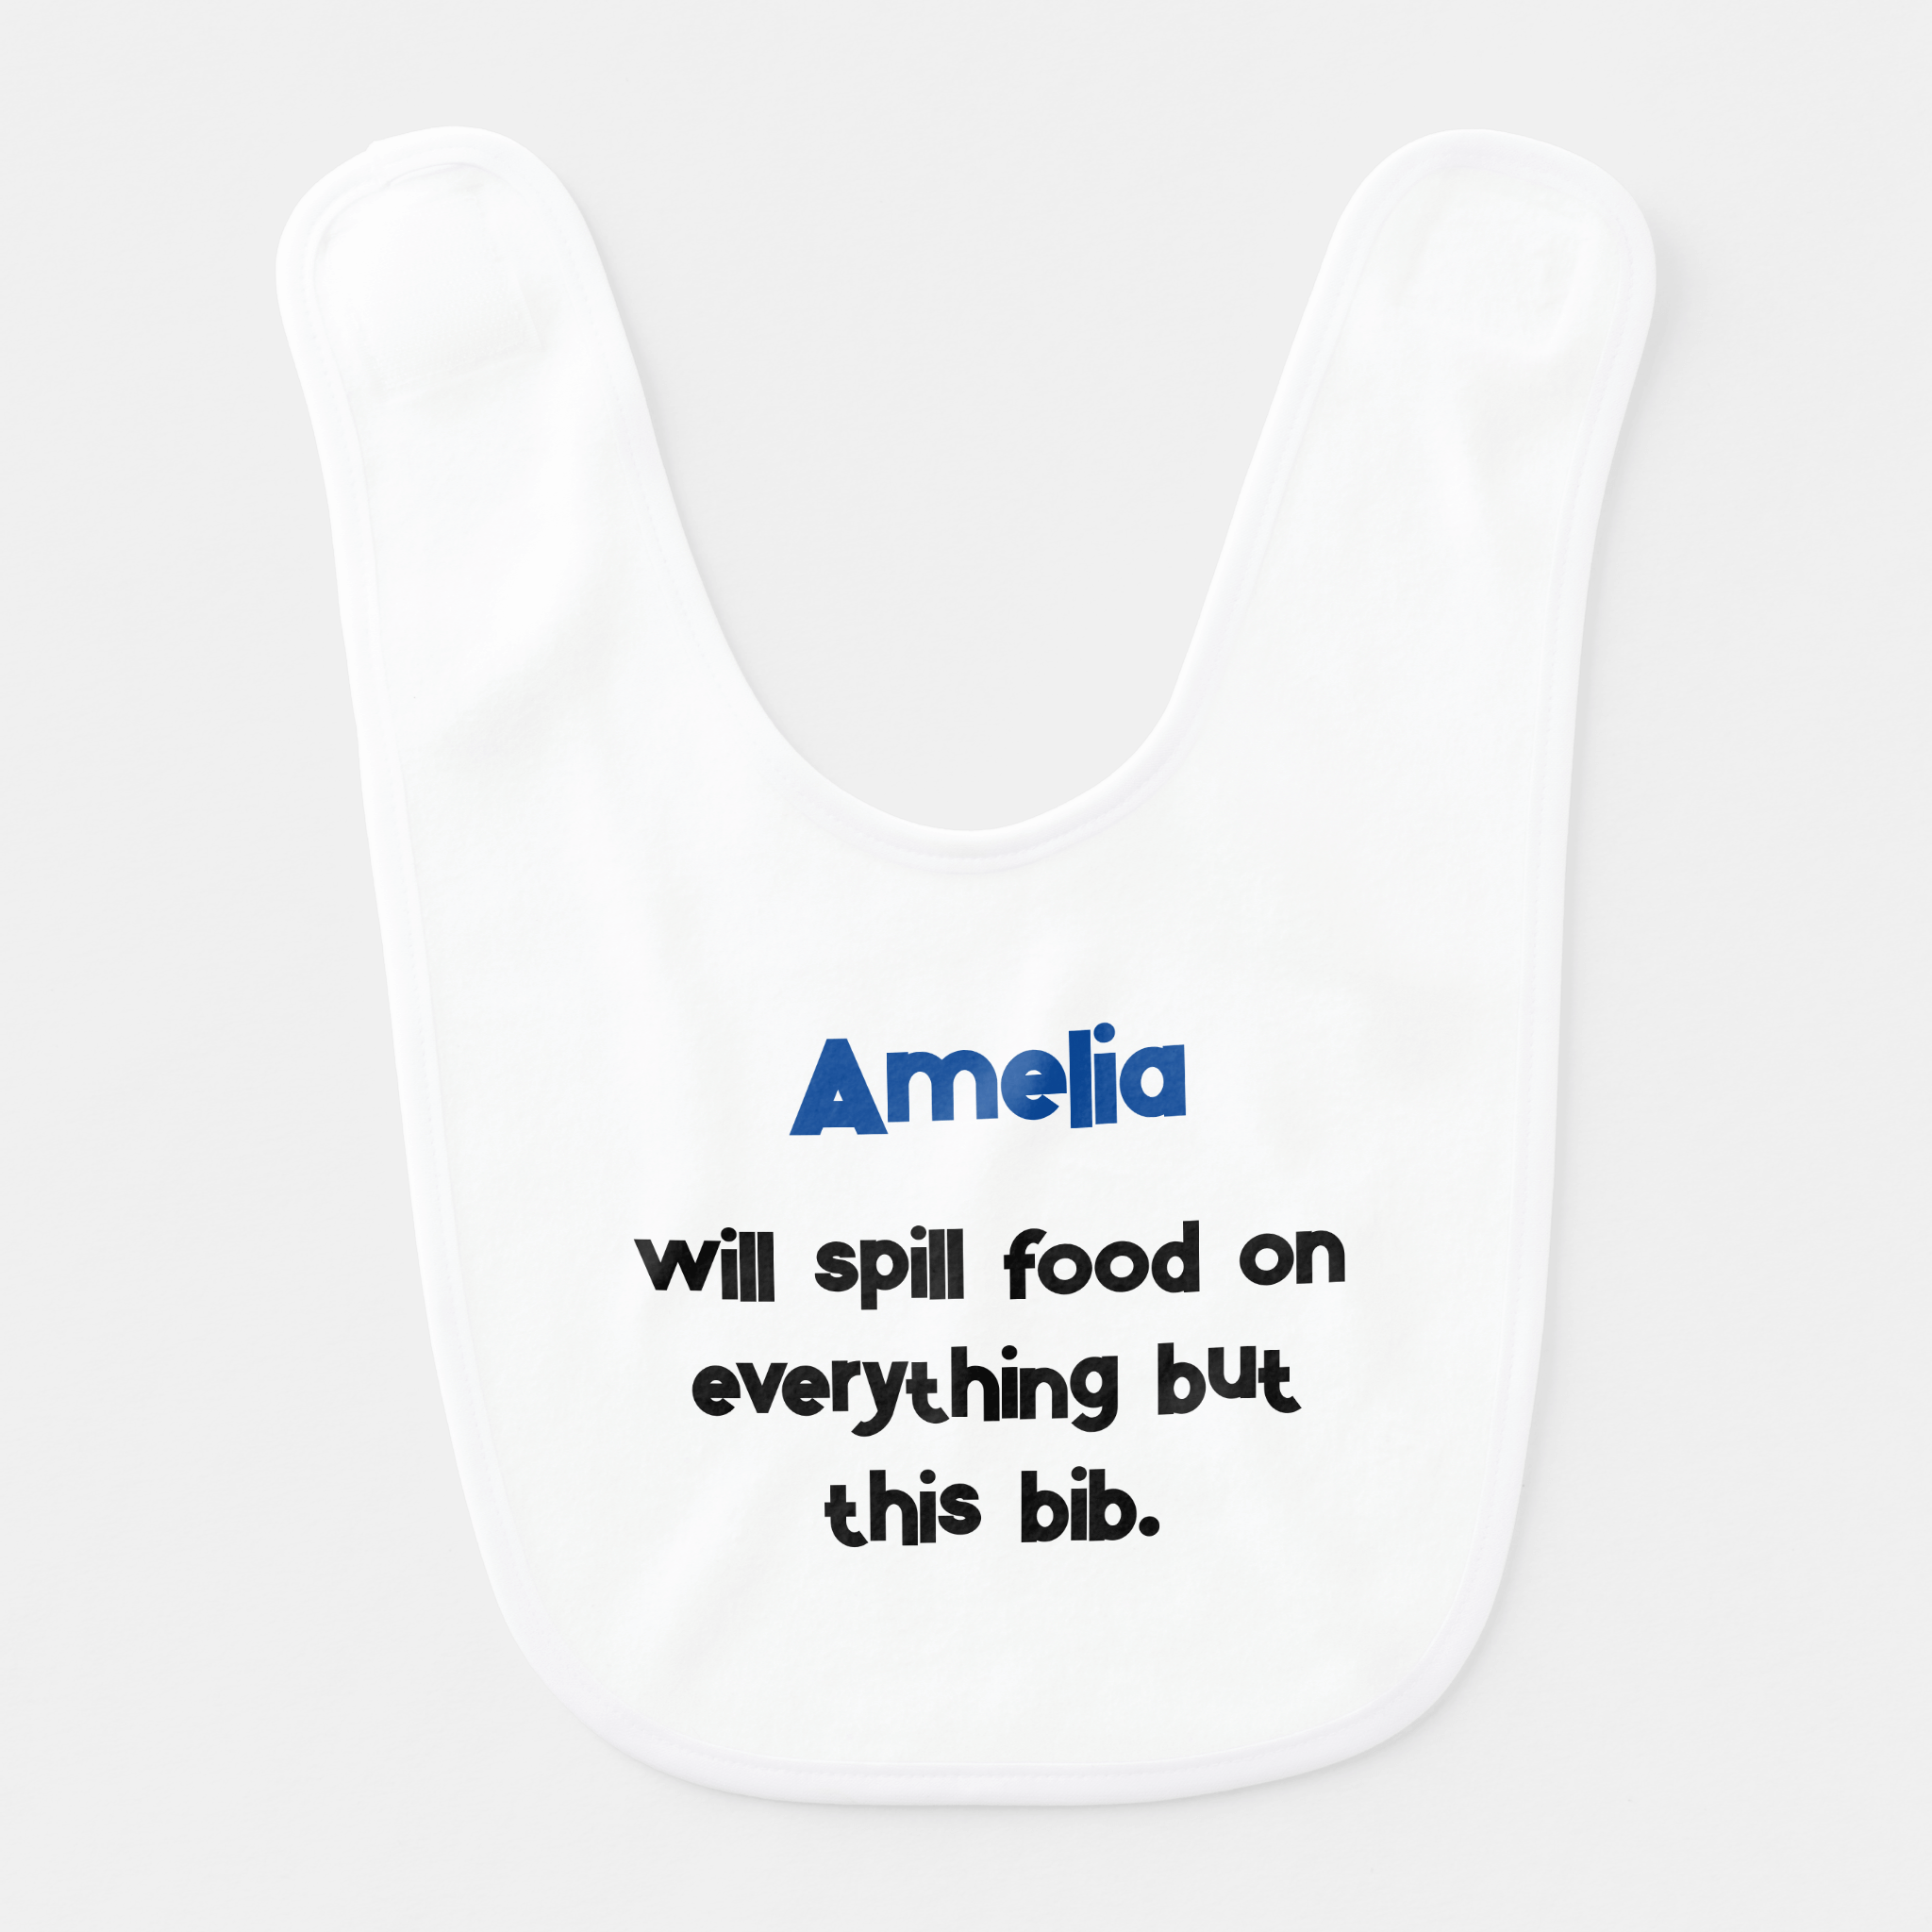 funny baby bib personalizable with text Baby will spill food on everything but the bib